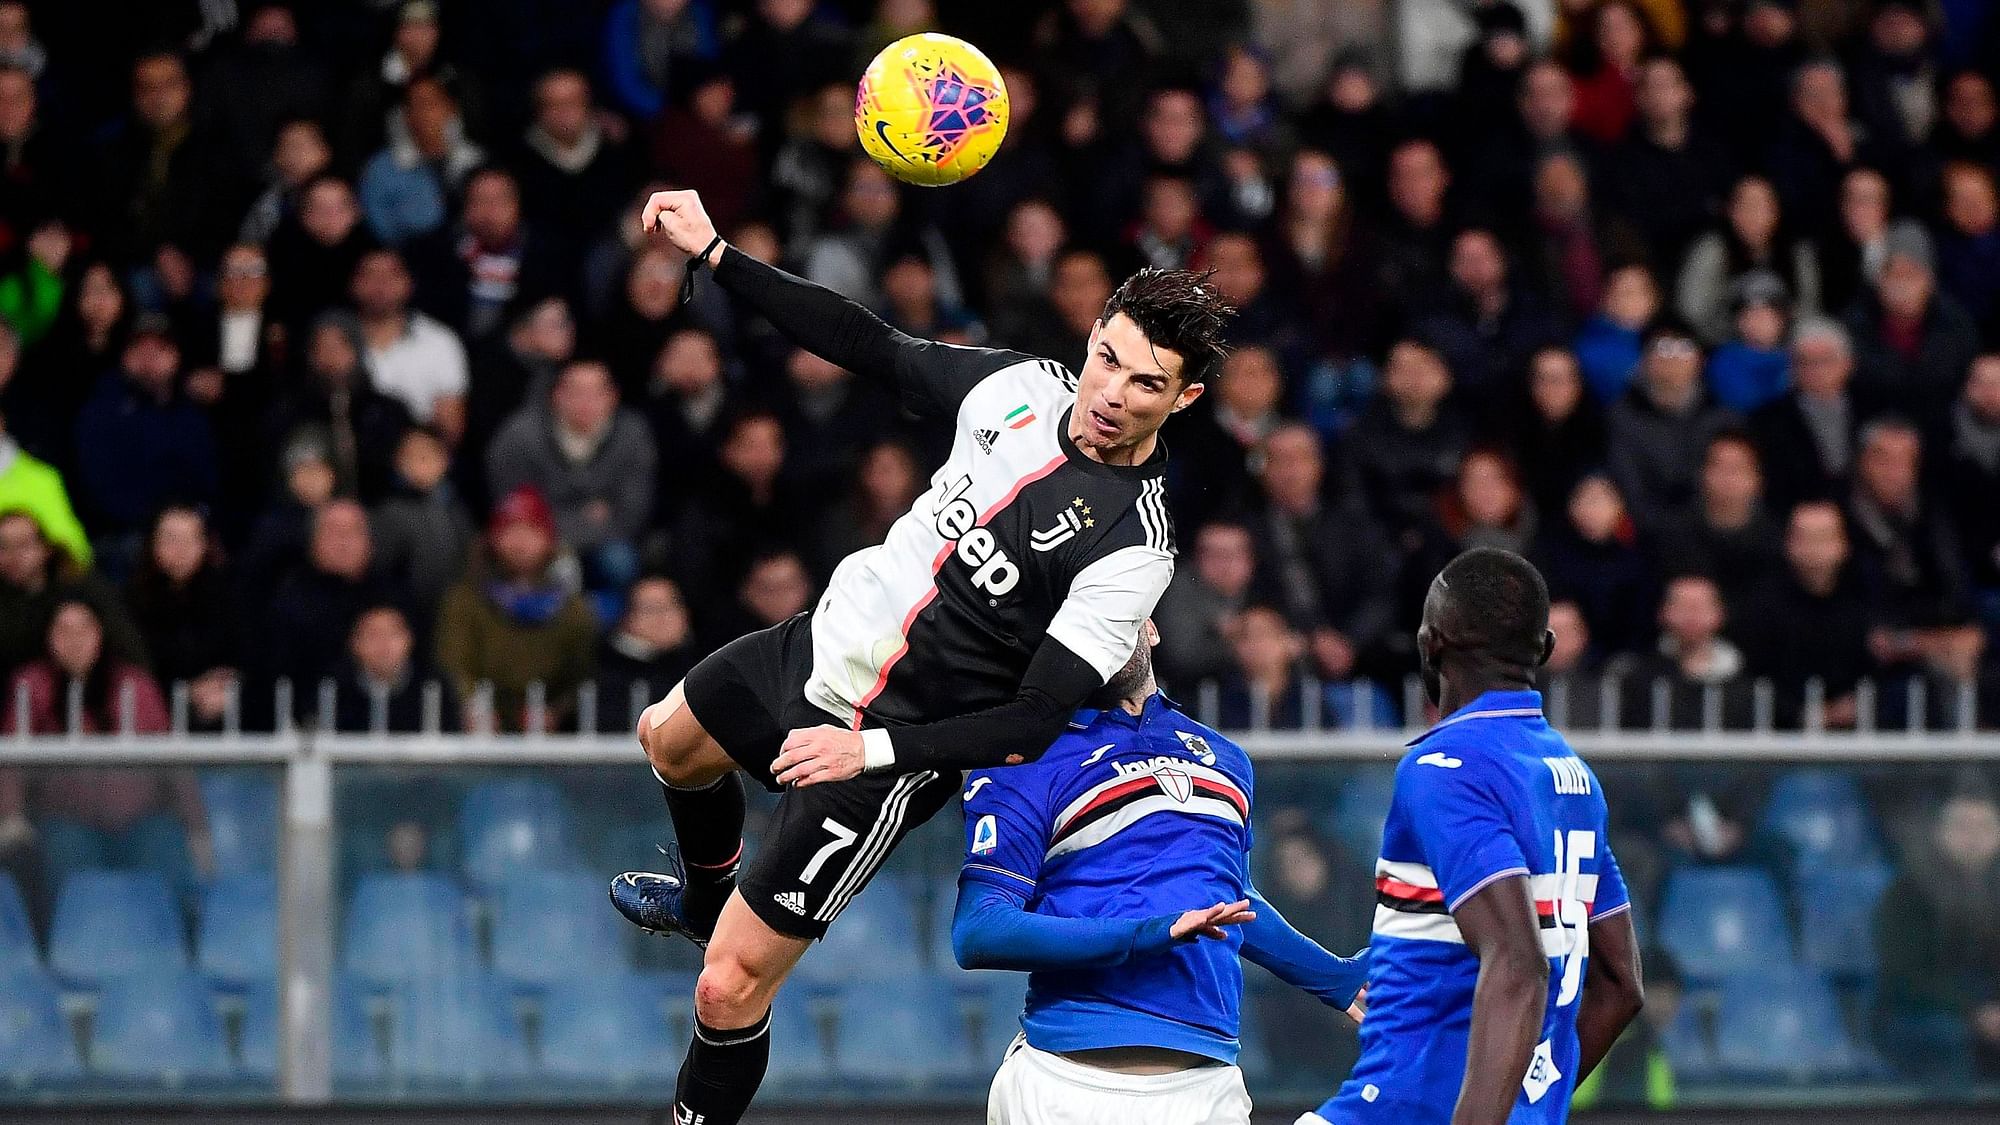 Cristiano Ronaldo had recently scored with an astonishing header to seal victory for Juventus in their Serie A game against Sampdoria.